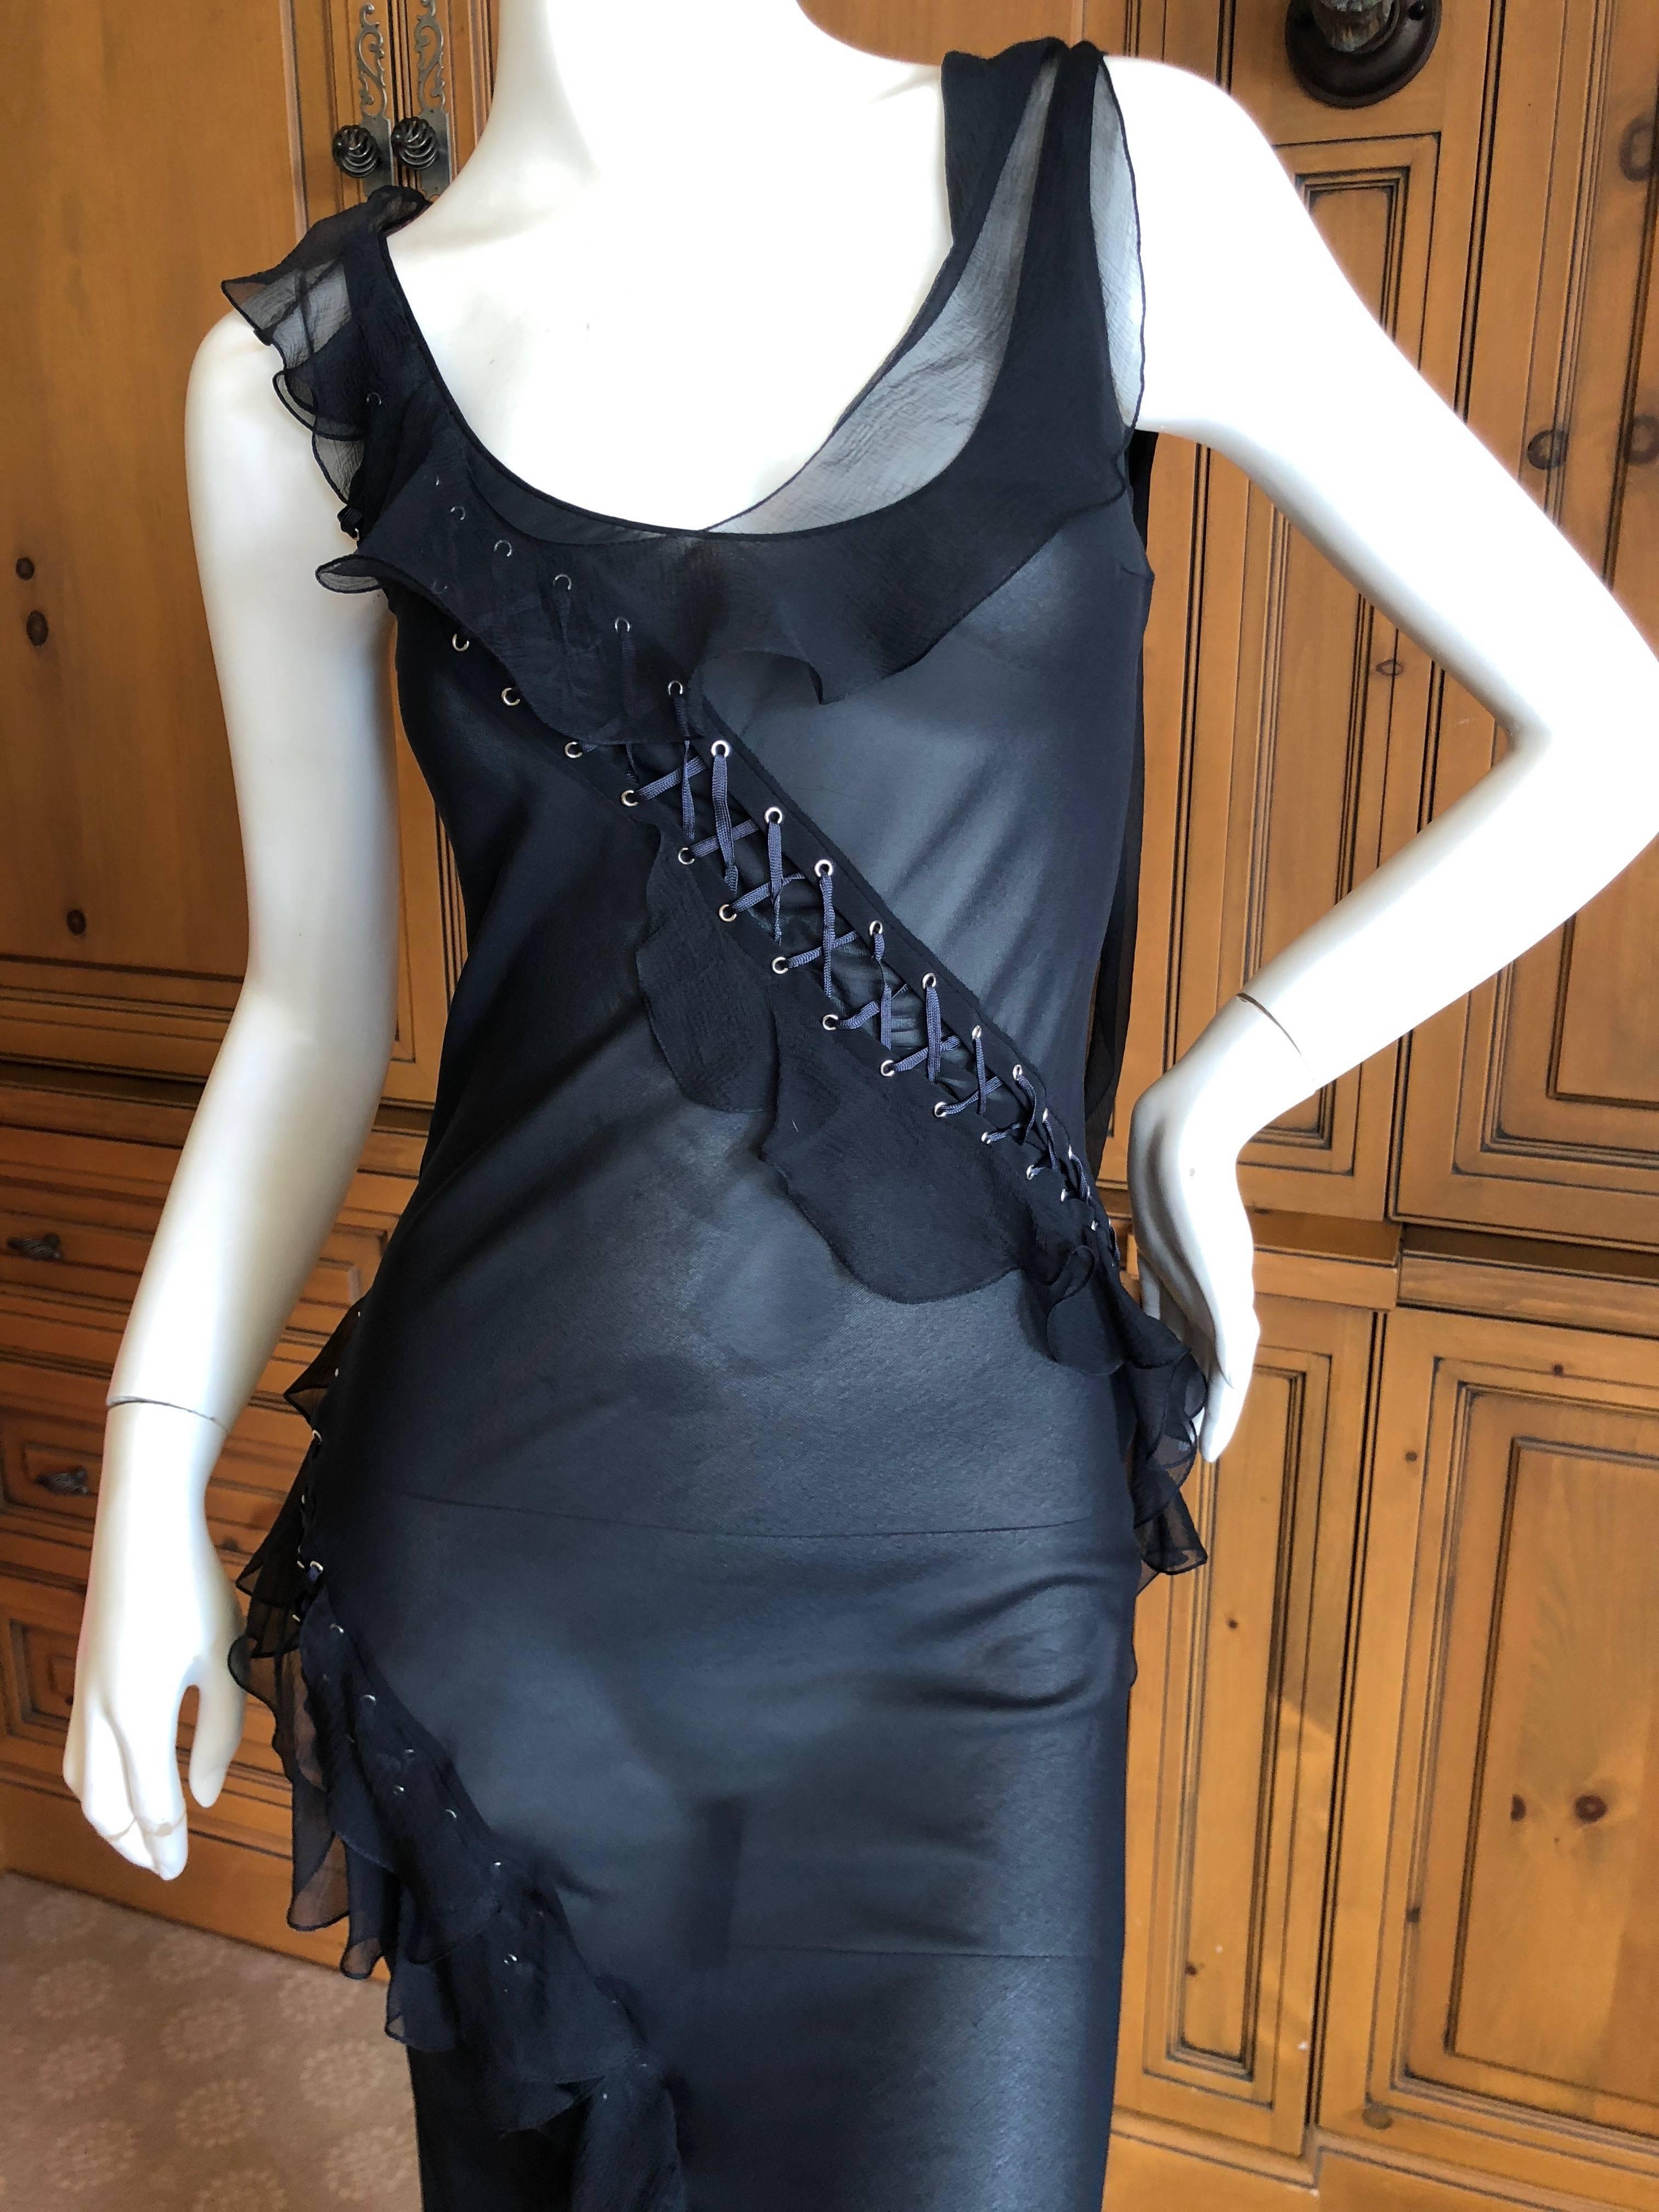 Women's or Men's Christian Dior by John Galliano Vintage Sheer Black Dress Corset Lace Up Details